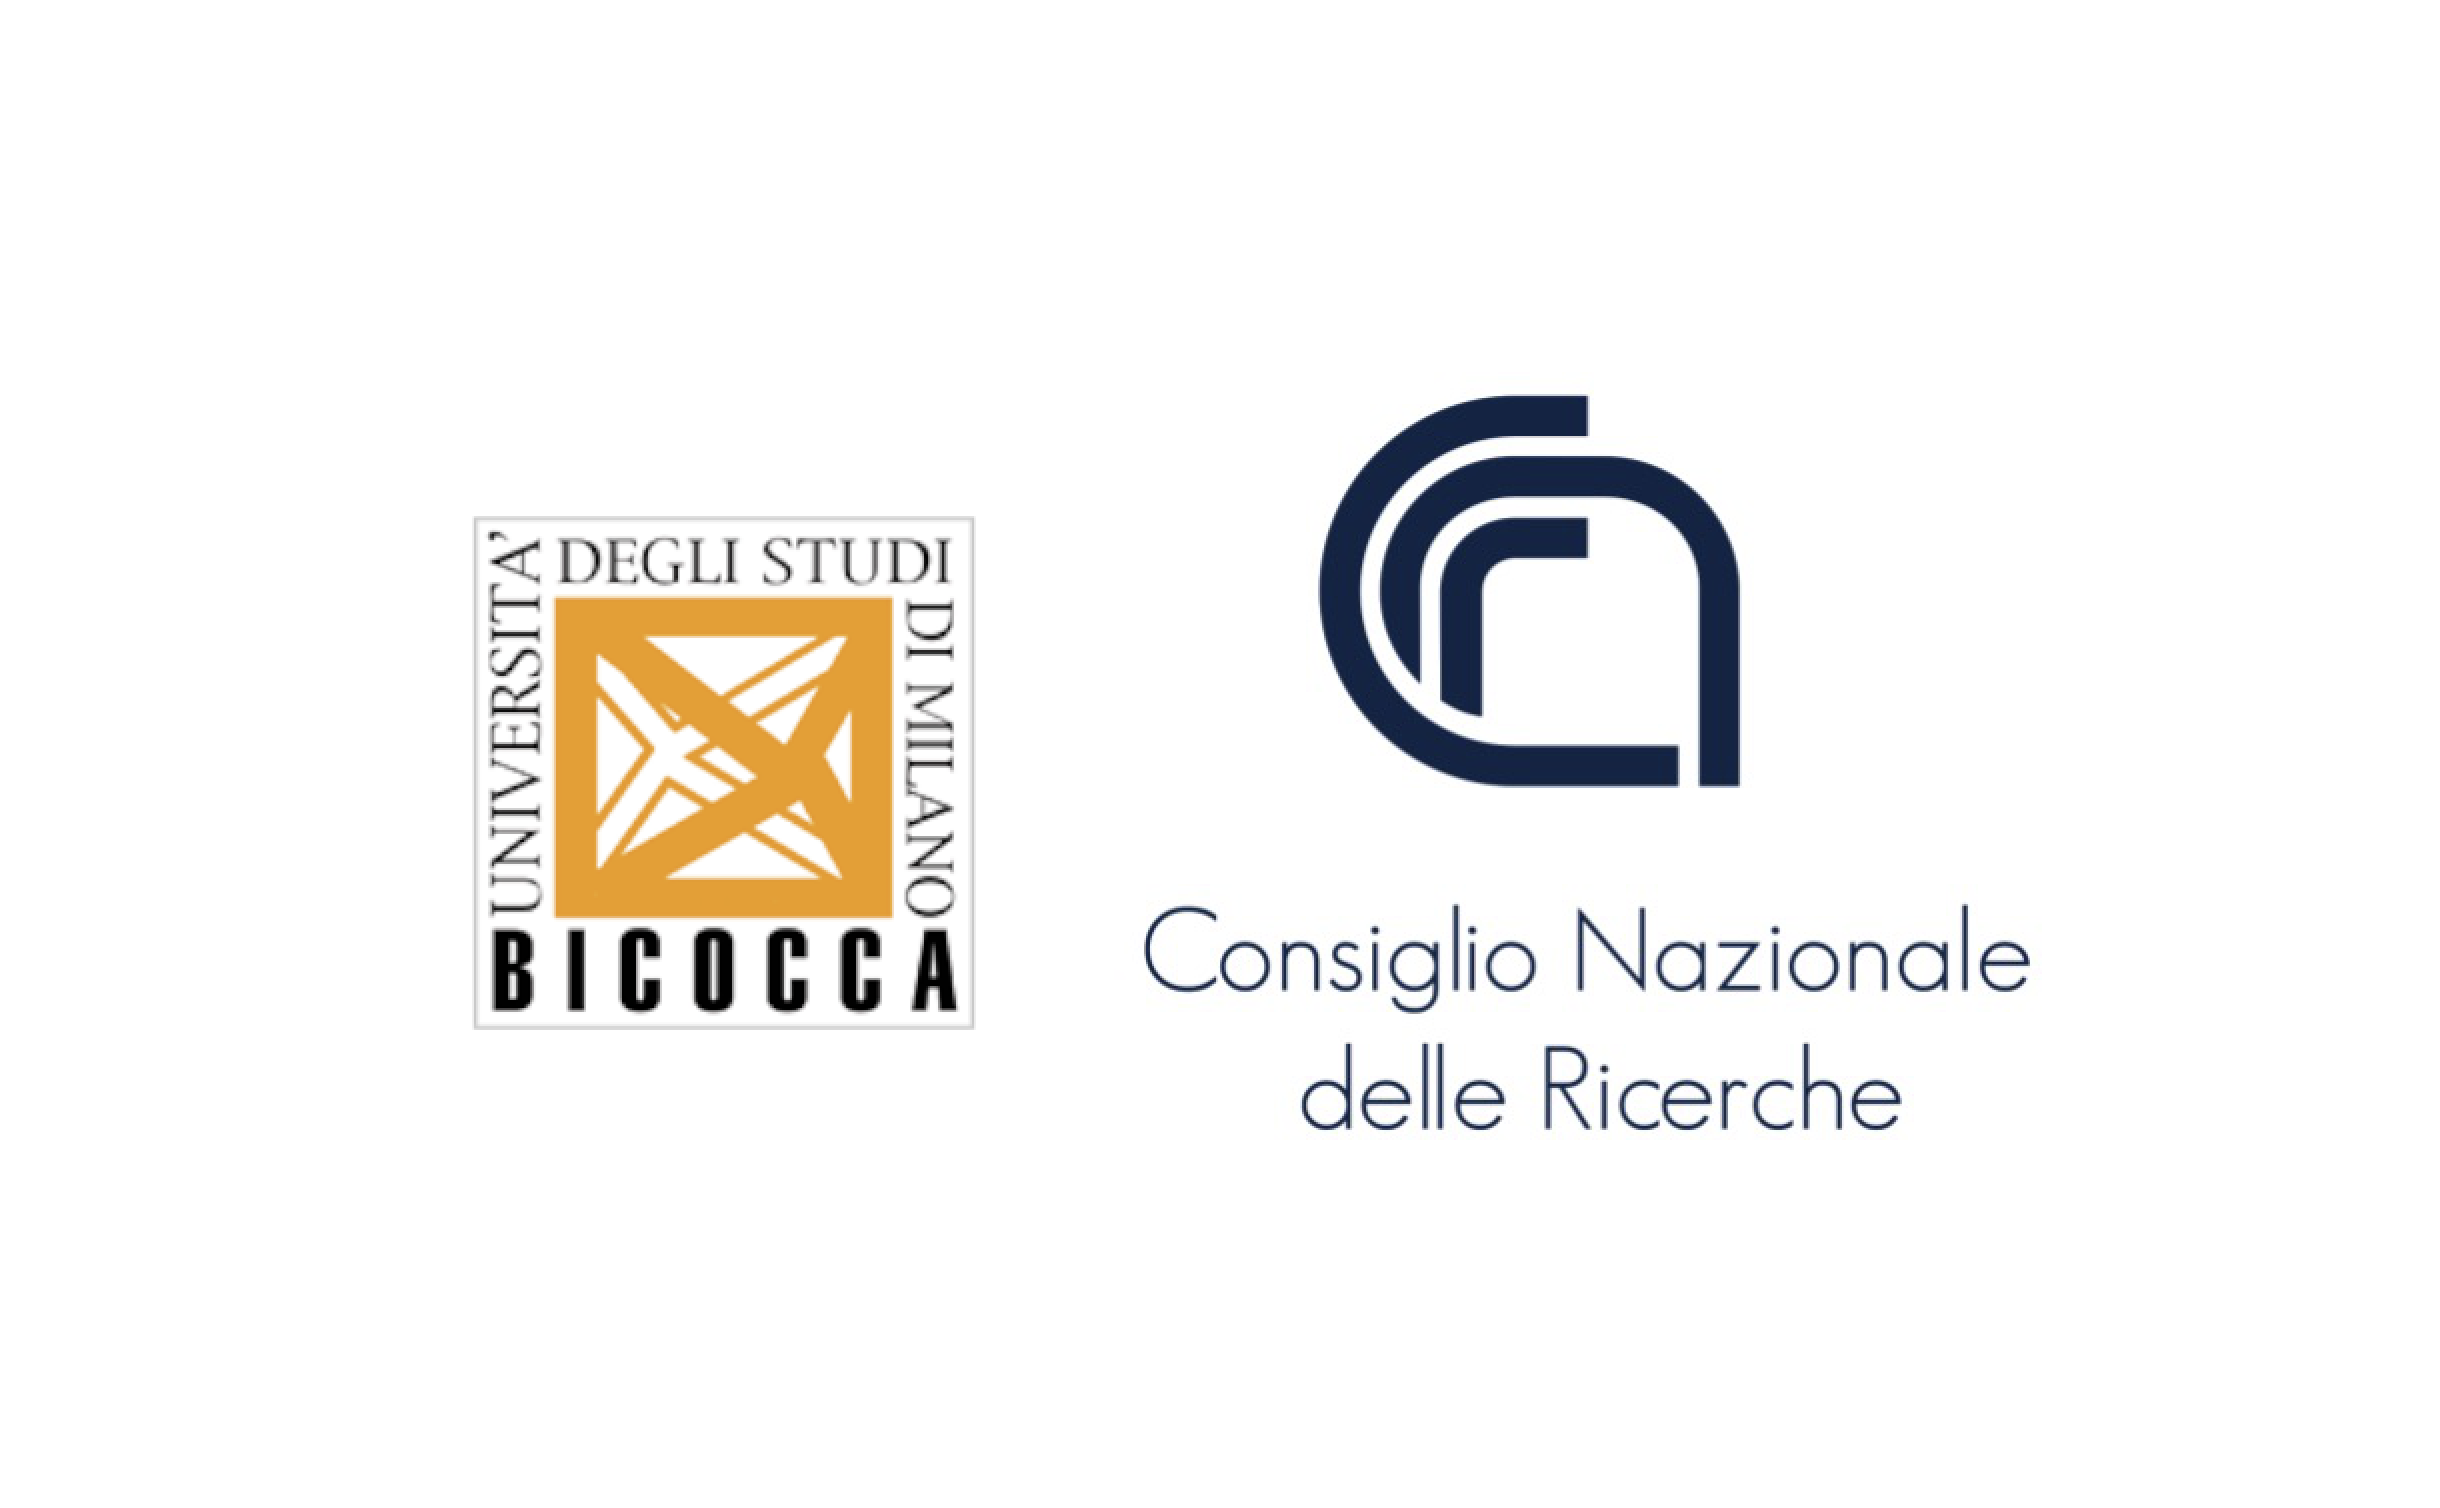 Data Archive Social Sciences Italy